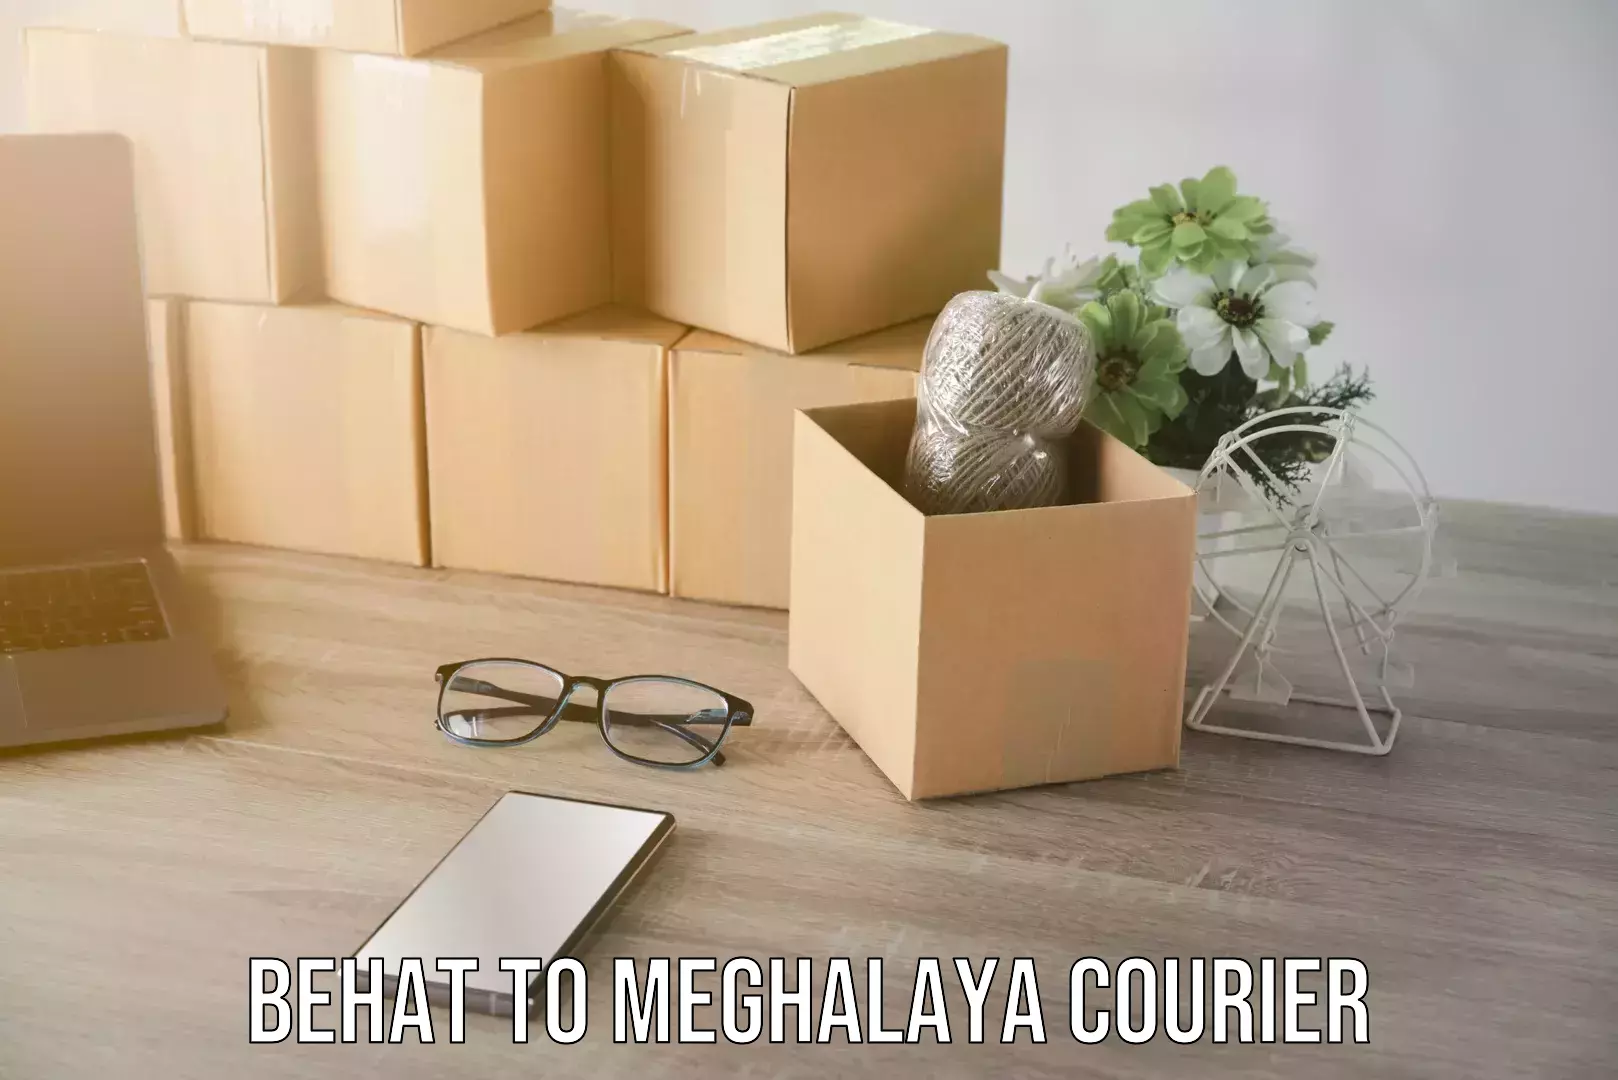 Nationwide courier service Behat to Meghalaya